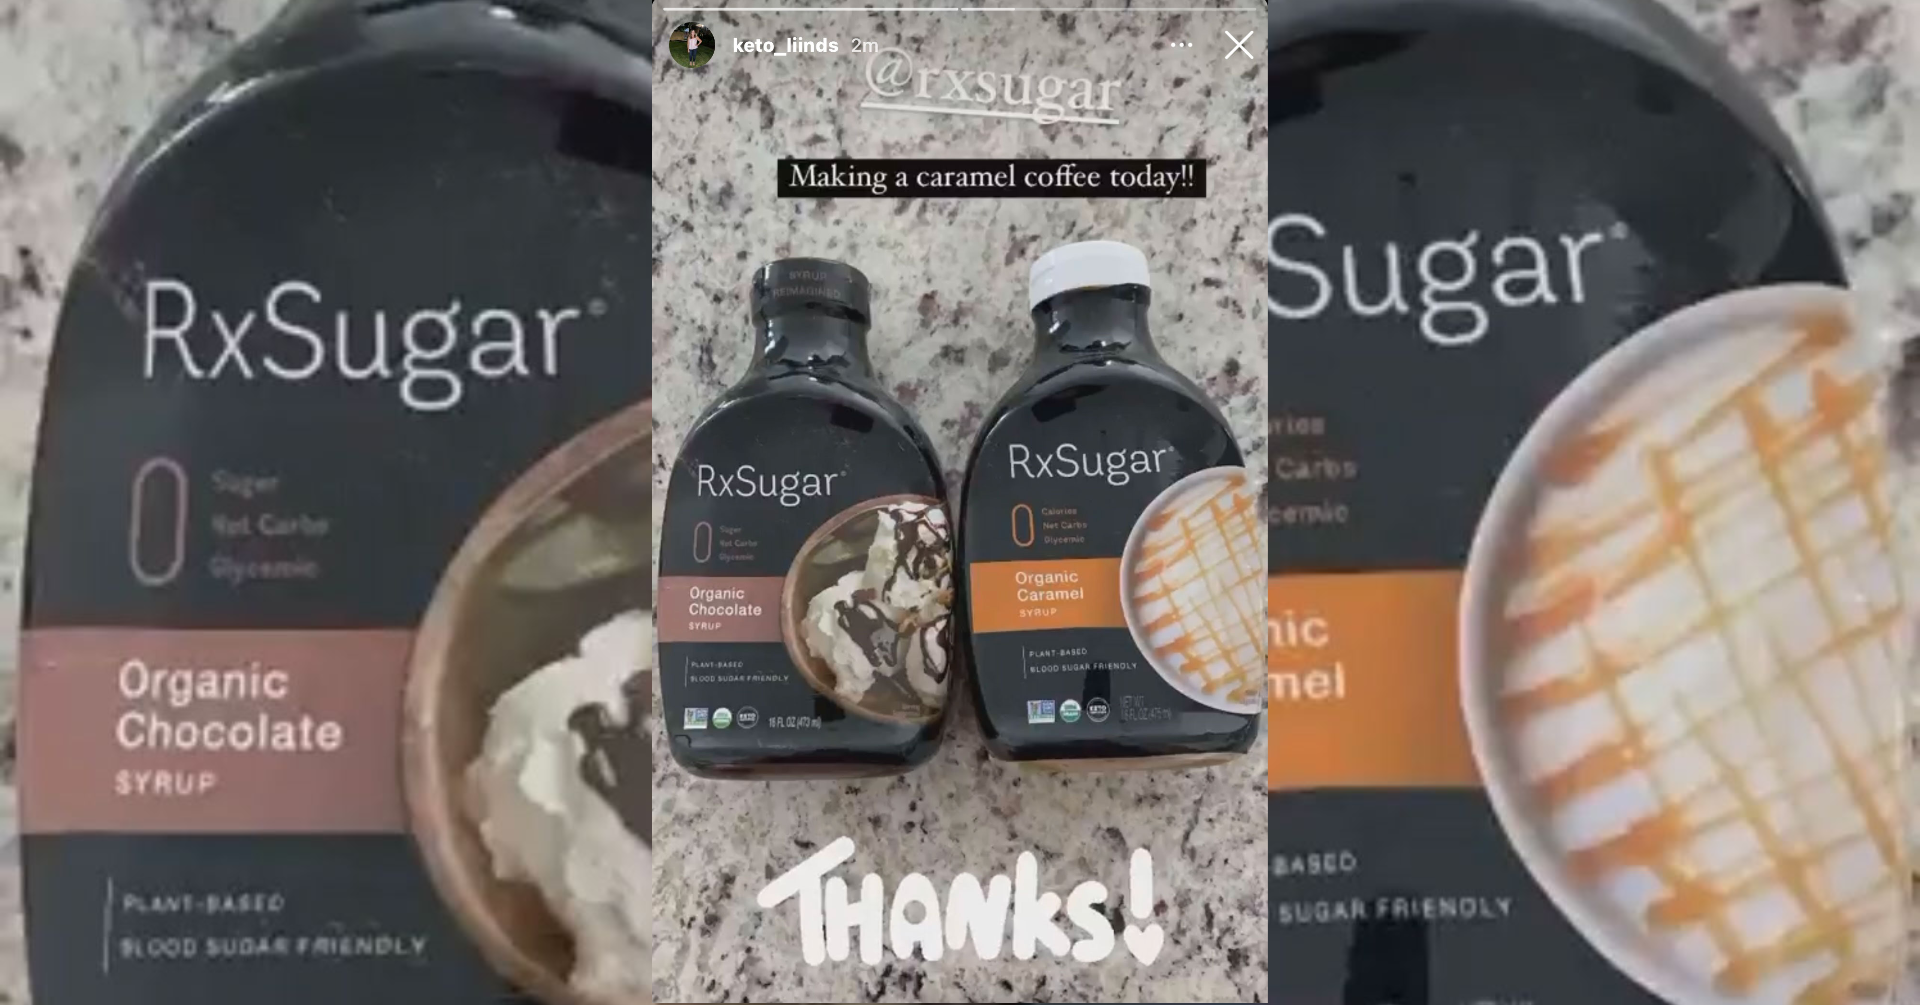 Keto Liinds Unboxing Her New RxSugar!